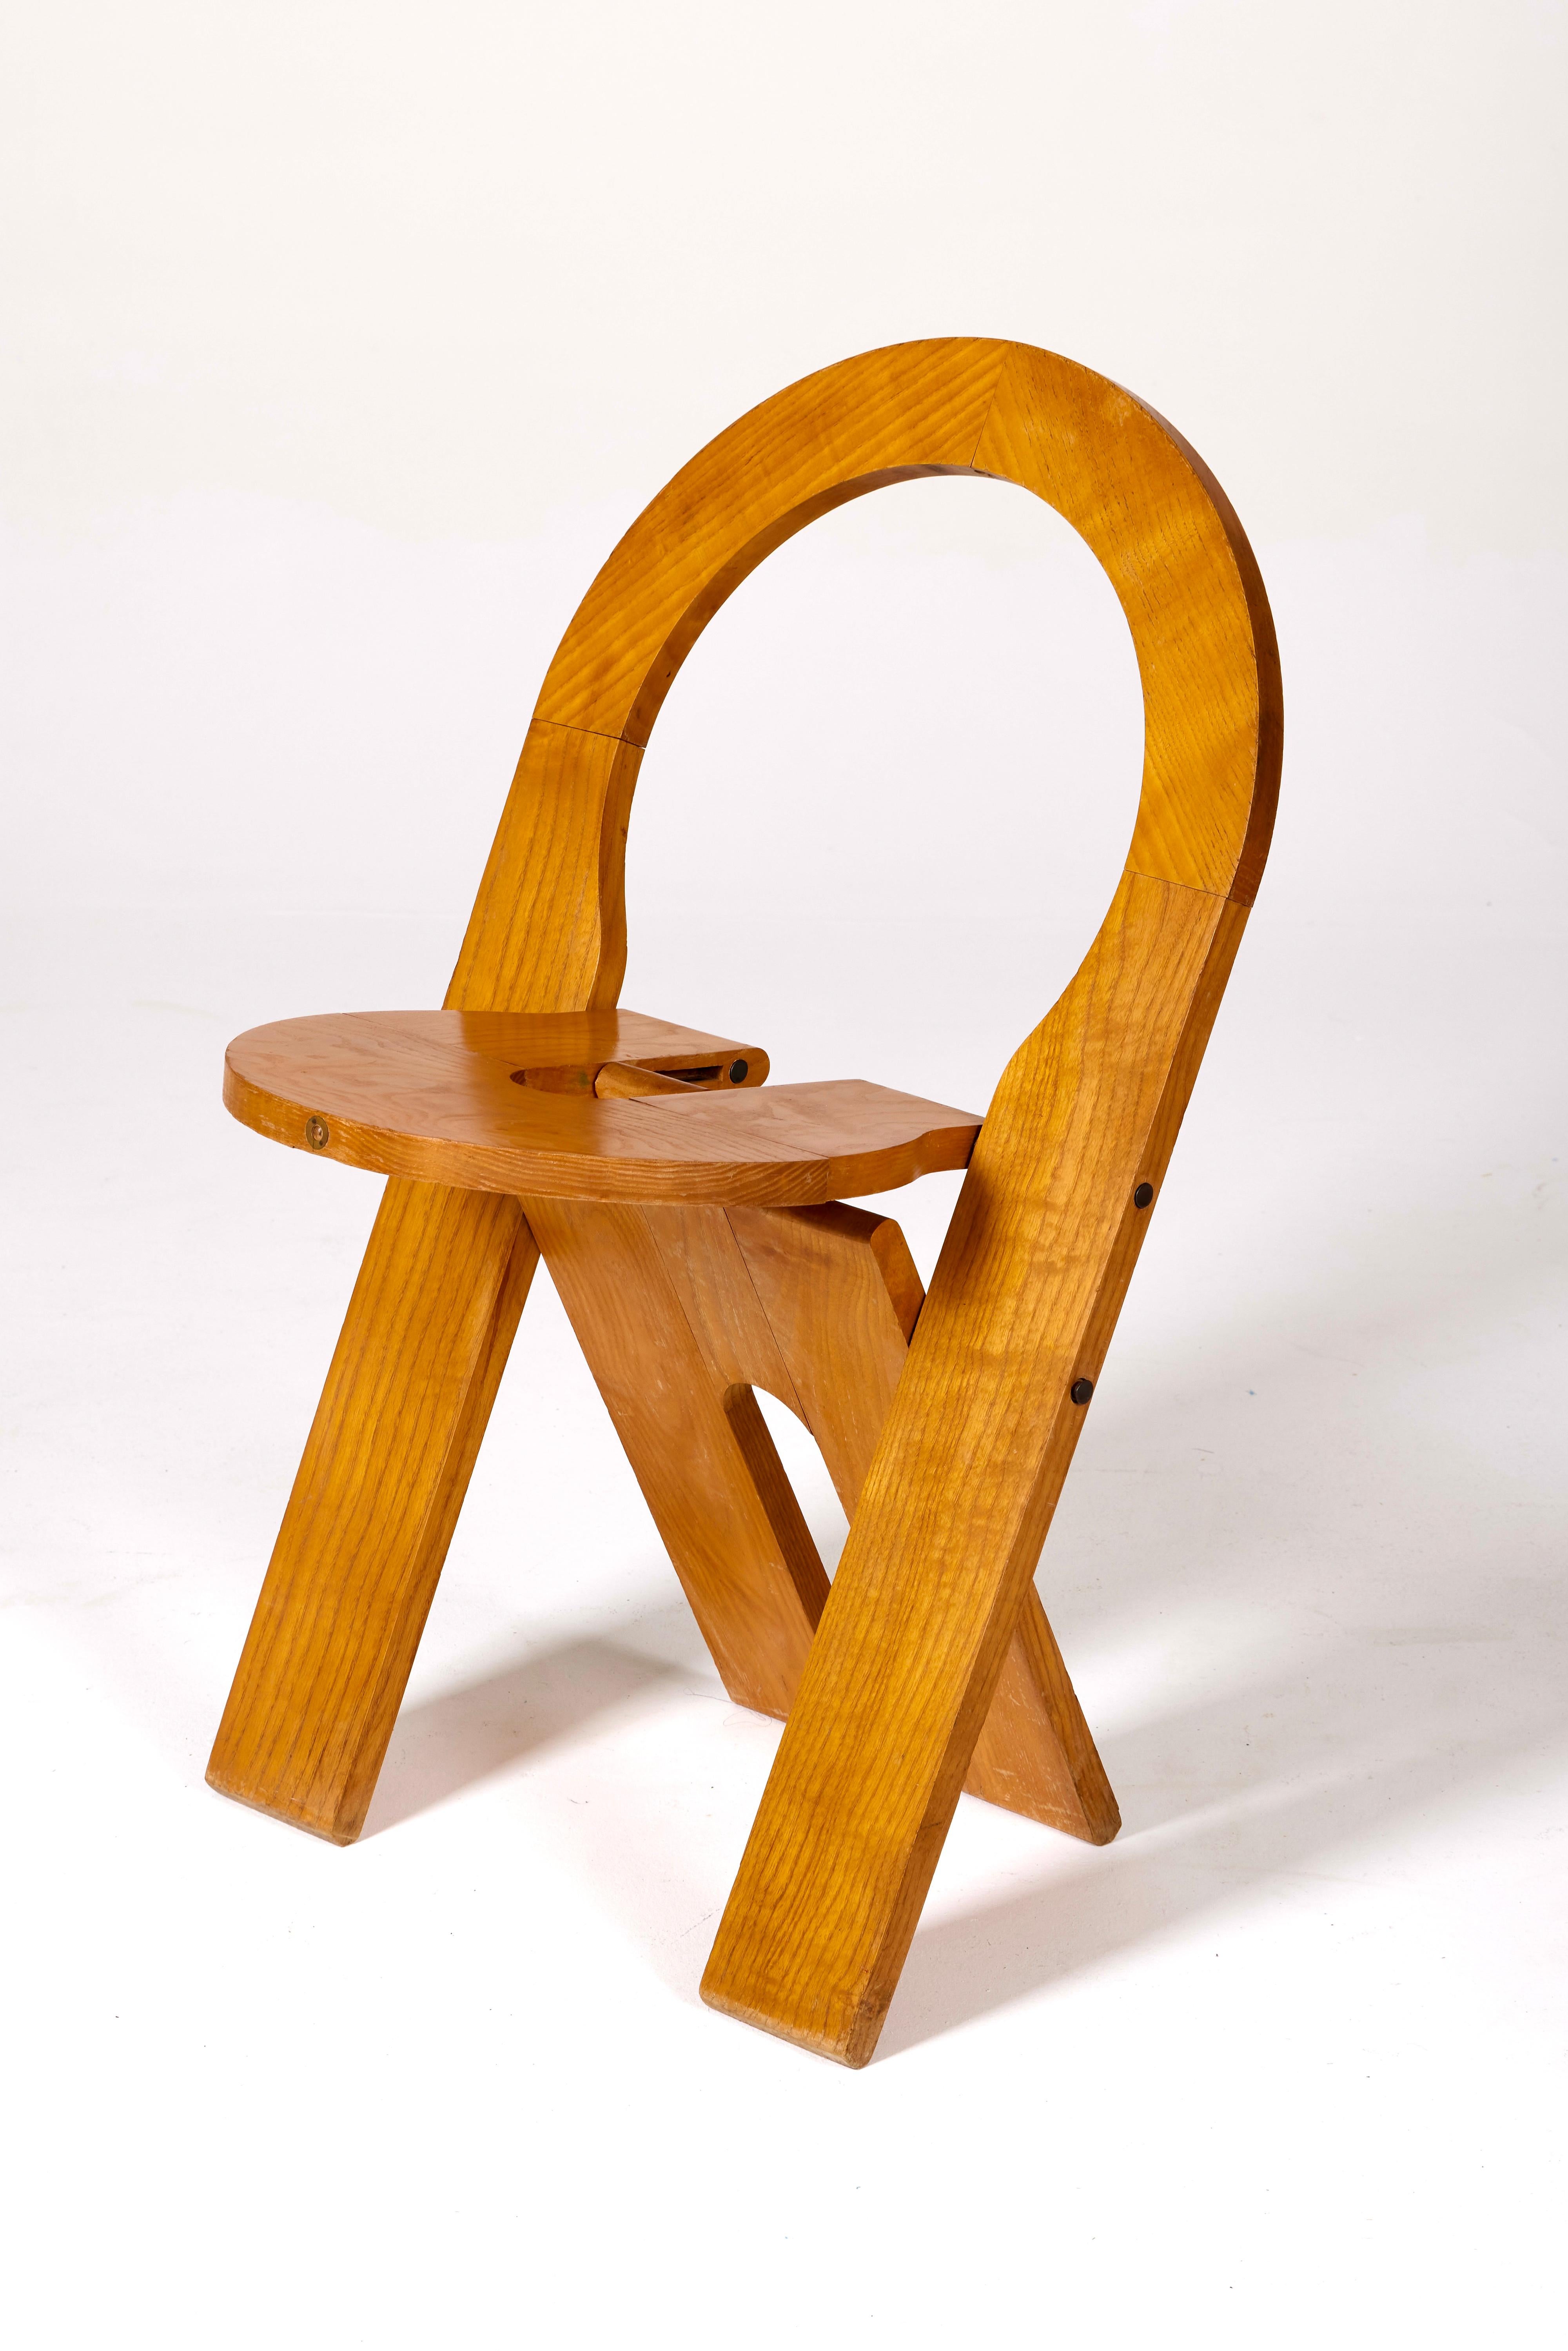 Folding chair model 'TS,' first edition designed by Roger Tallon in the 1970s. Made of solid wood. Good condition.
LP1146-1147